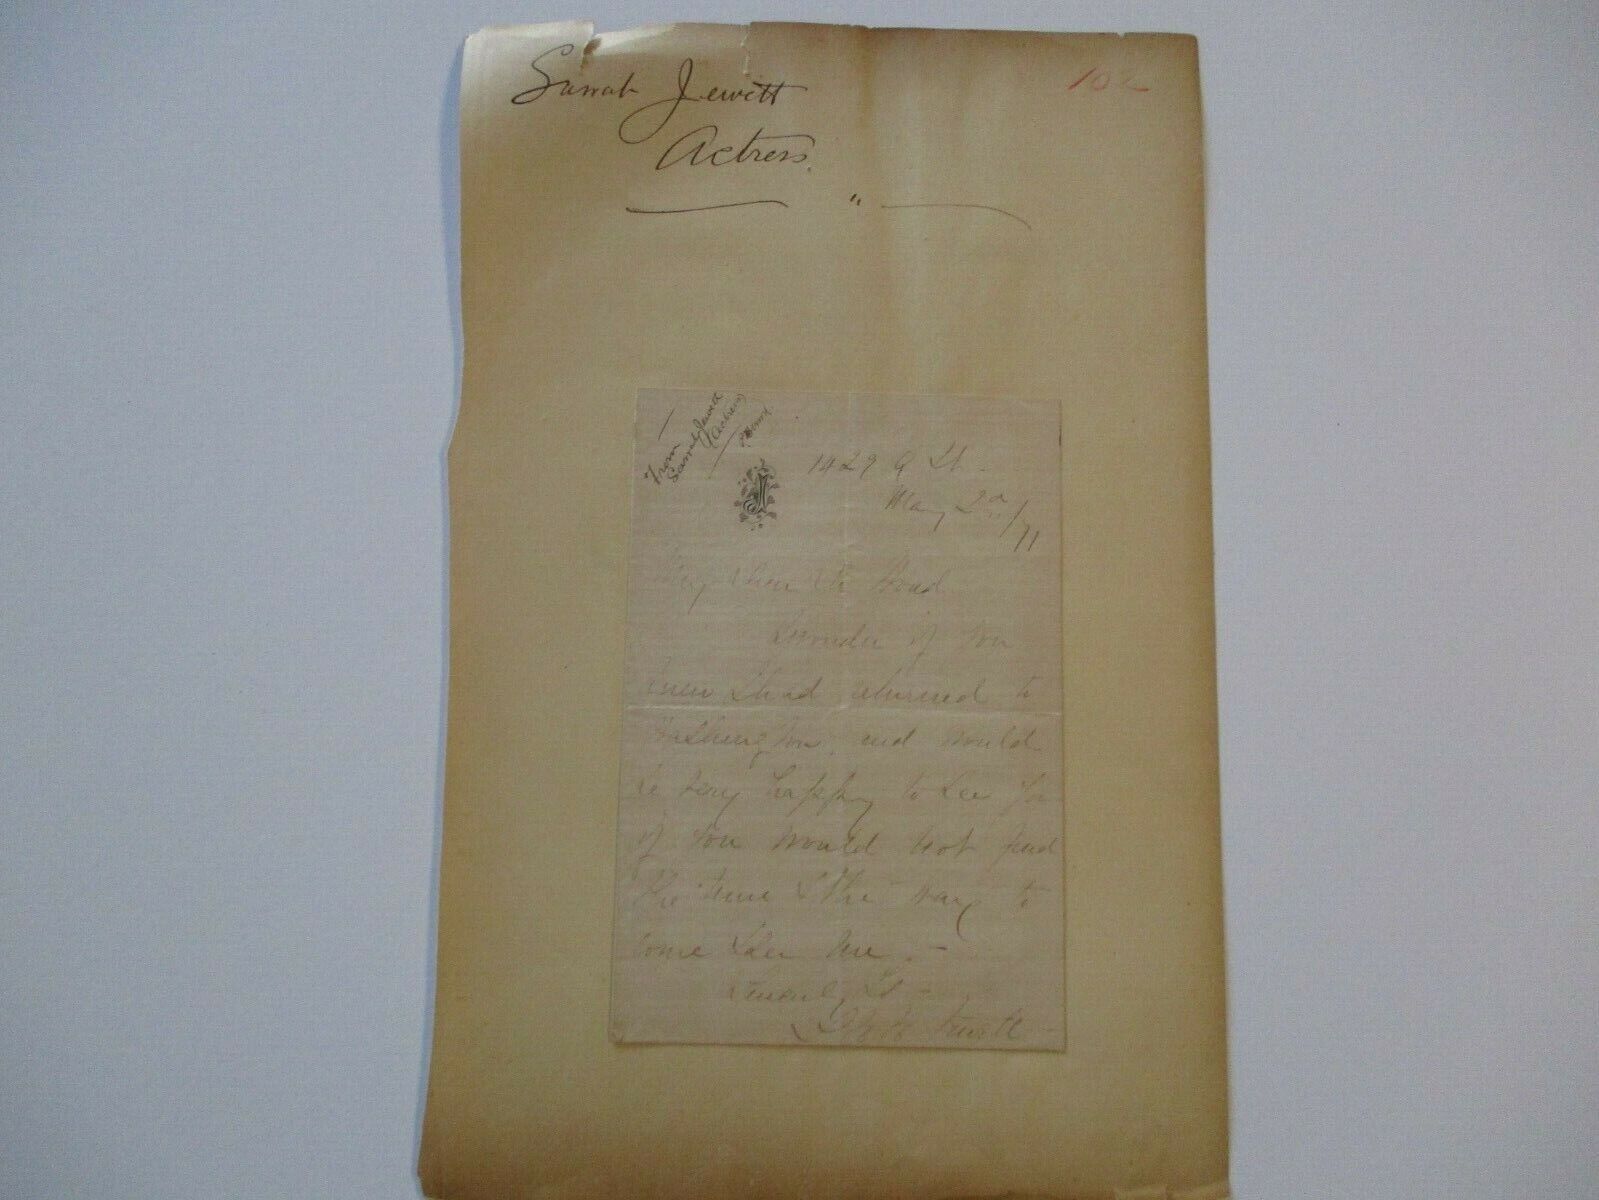 ANTIQUE AUTOGRAPH OF SARAH JEWETT ACTRESS SIGNED LETTER 19TH CENTURY 